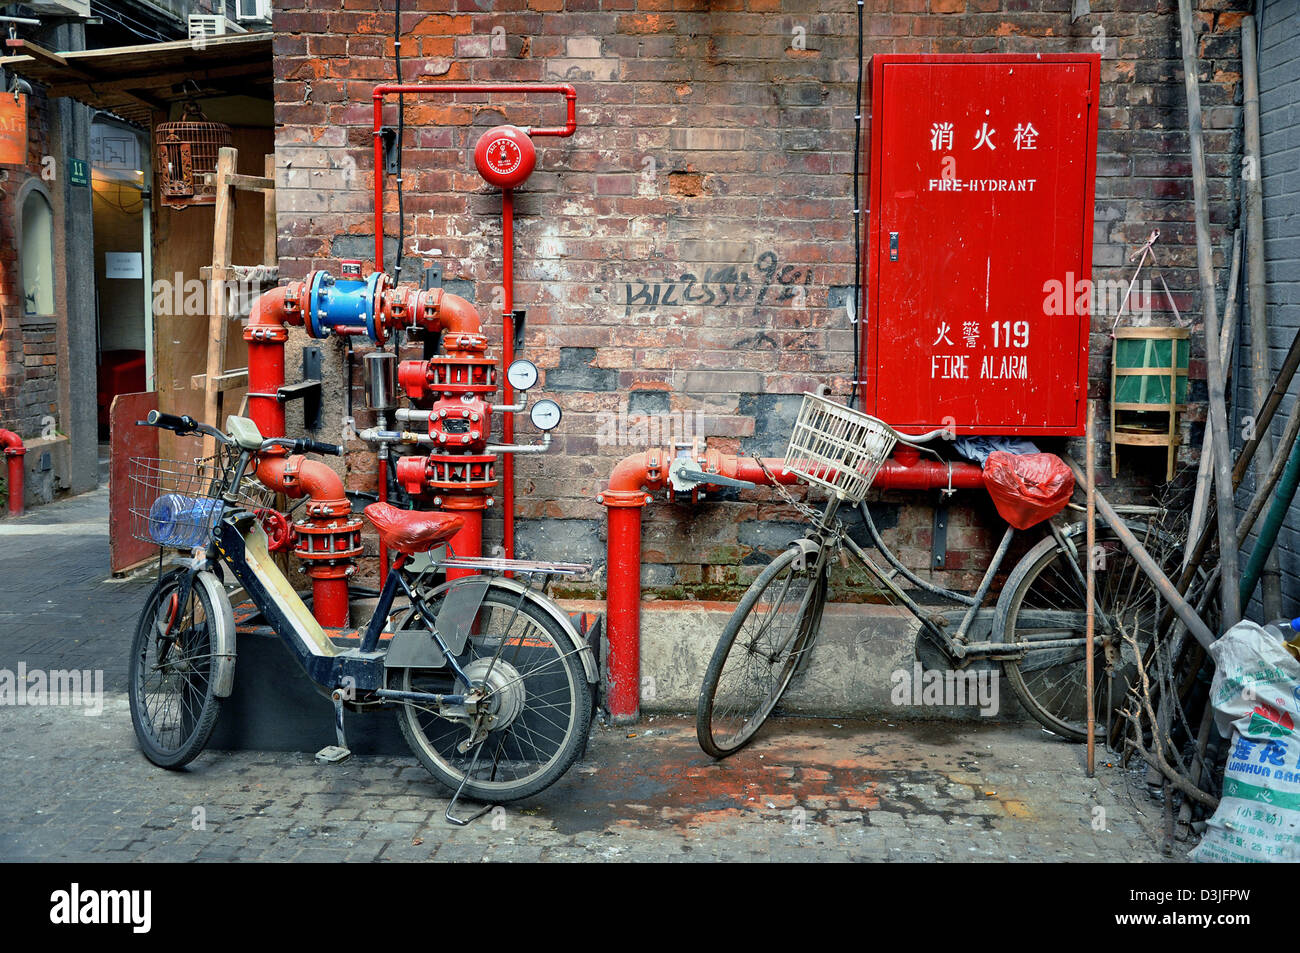 Bikes and red water pipes in an alley of Tianzifang, a renovated area in the French Concession near Taikang Lu, Shanghai - China Stock Photo